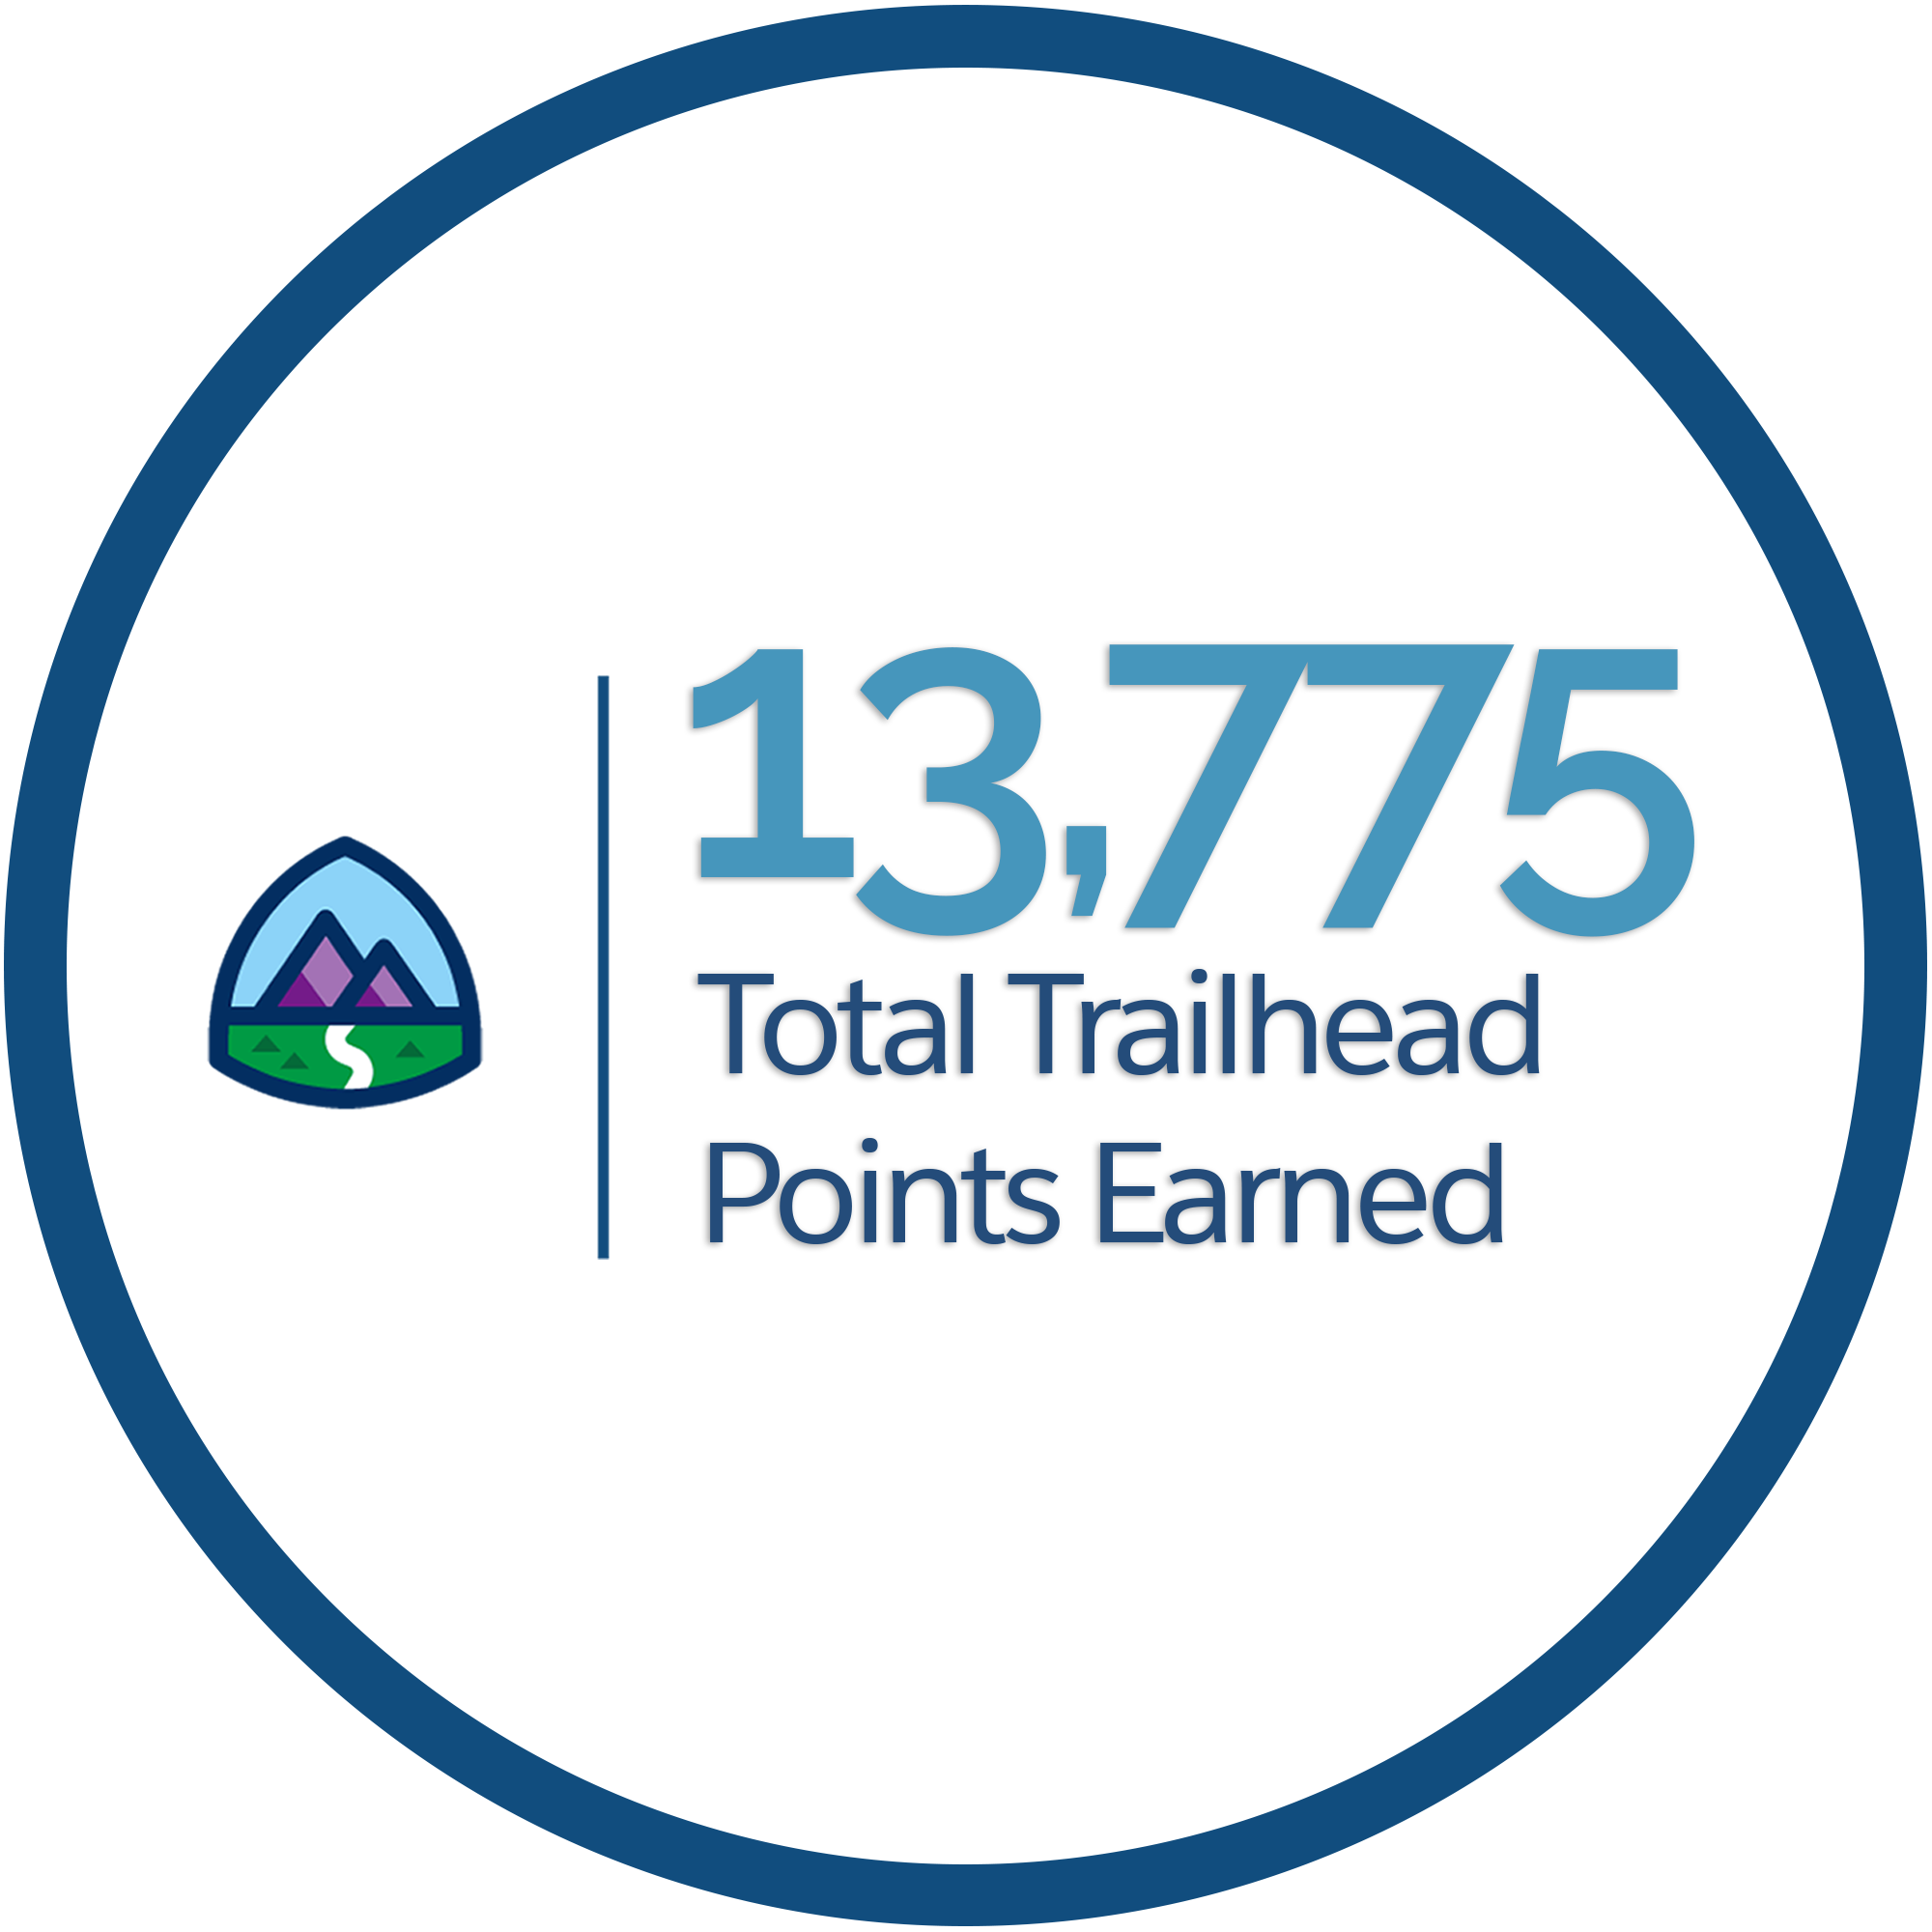 Graphic that shows 13,775 trailhead points earned